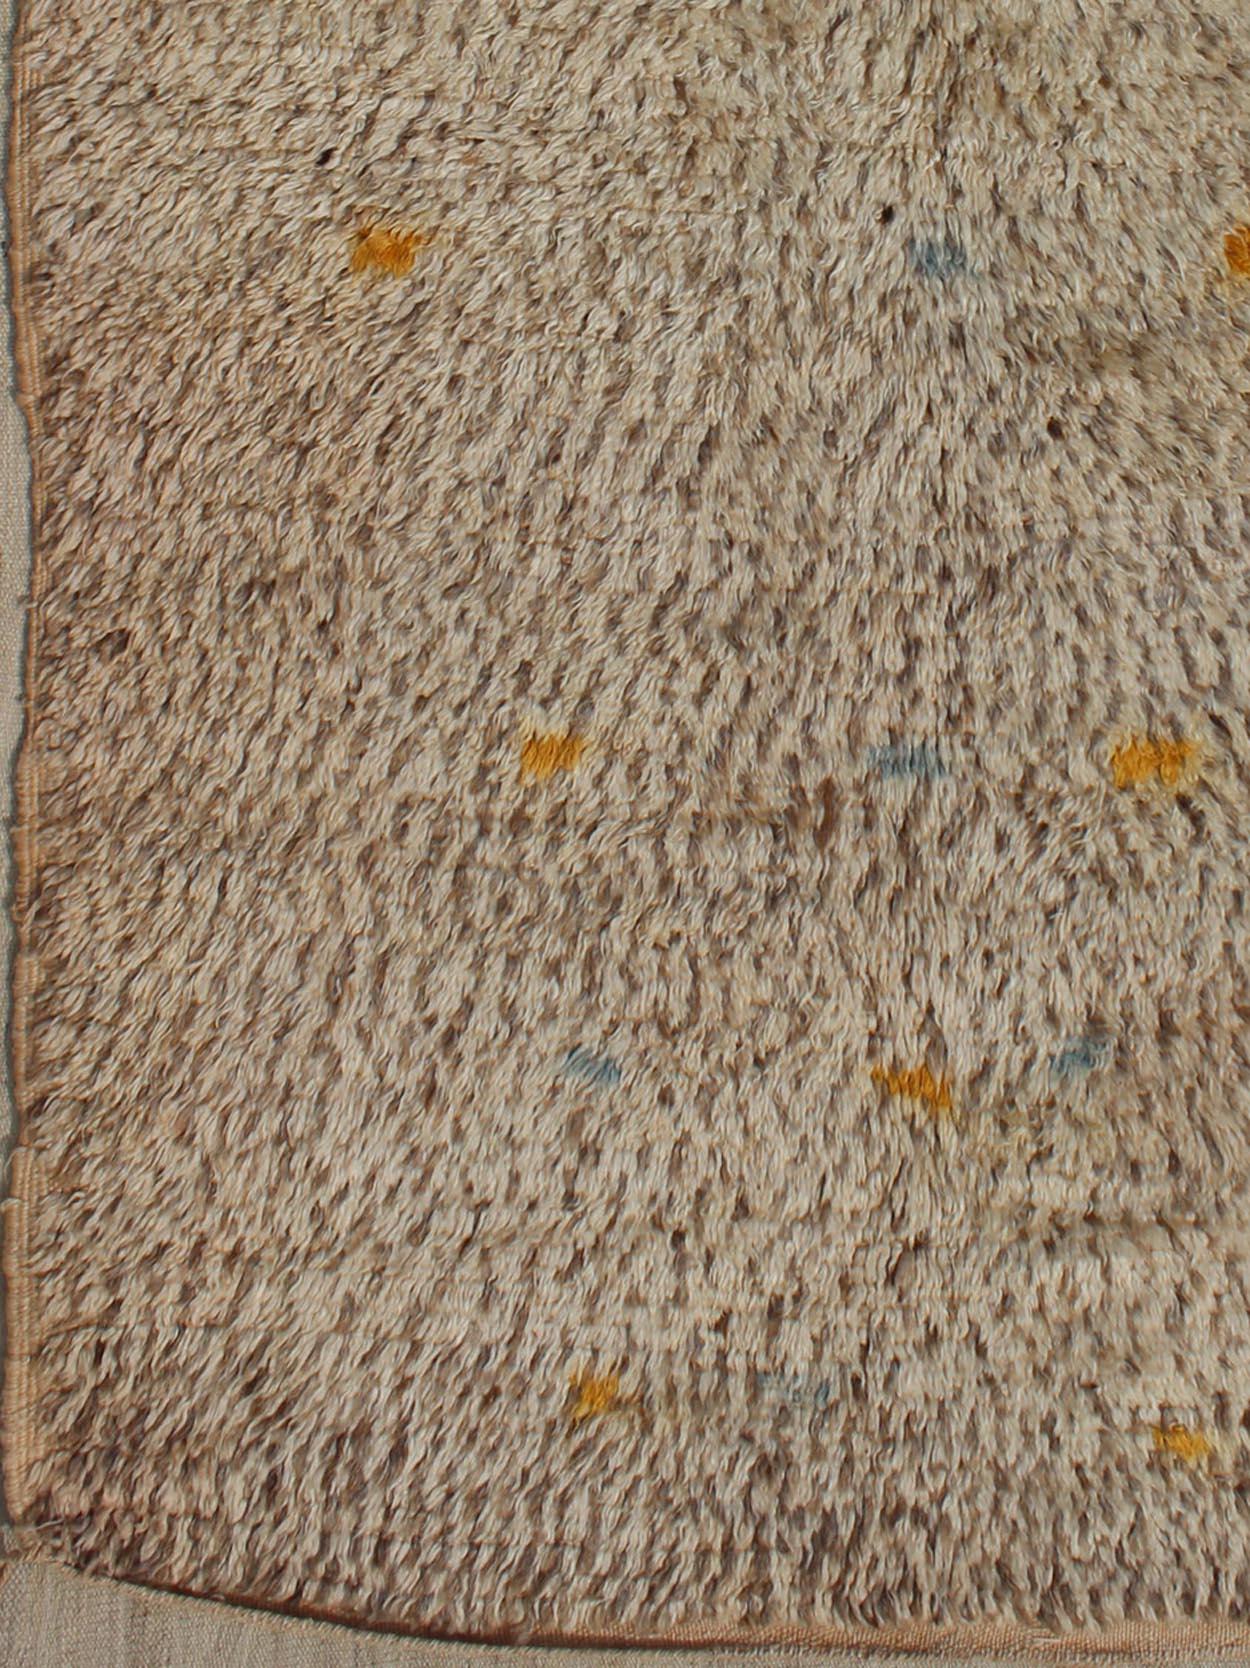 Vintage Moroccan rug on a taupe field with pops of blue and yellow.
Rug BDS-20124, Keivan Woven Arts / country of origin / type: Morocco / Tribal, circa 1940.
Measures: 4'0 x 6'6.
This unique vintage Moroccan carpet is characterized by a simple